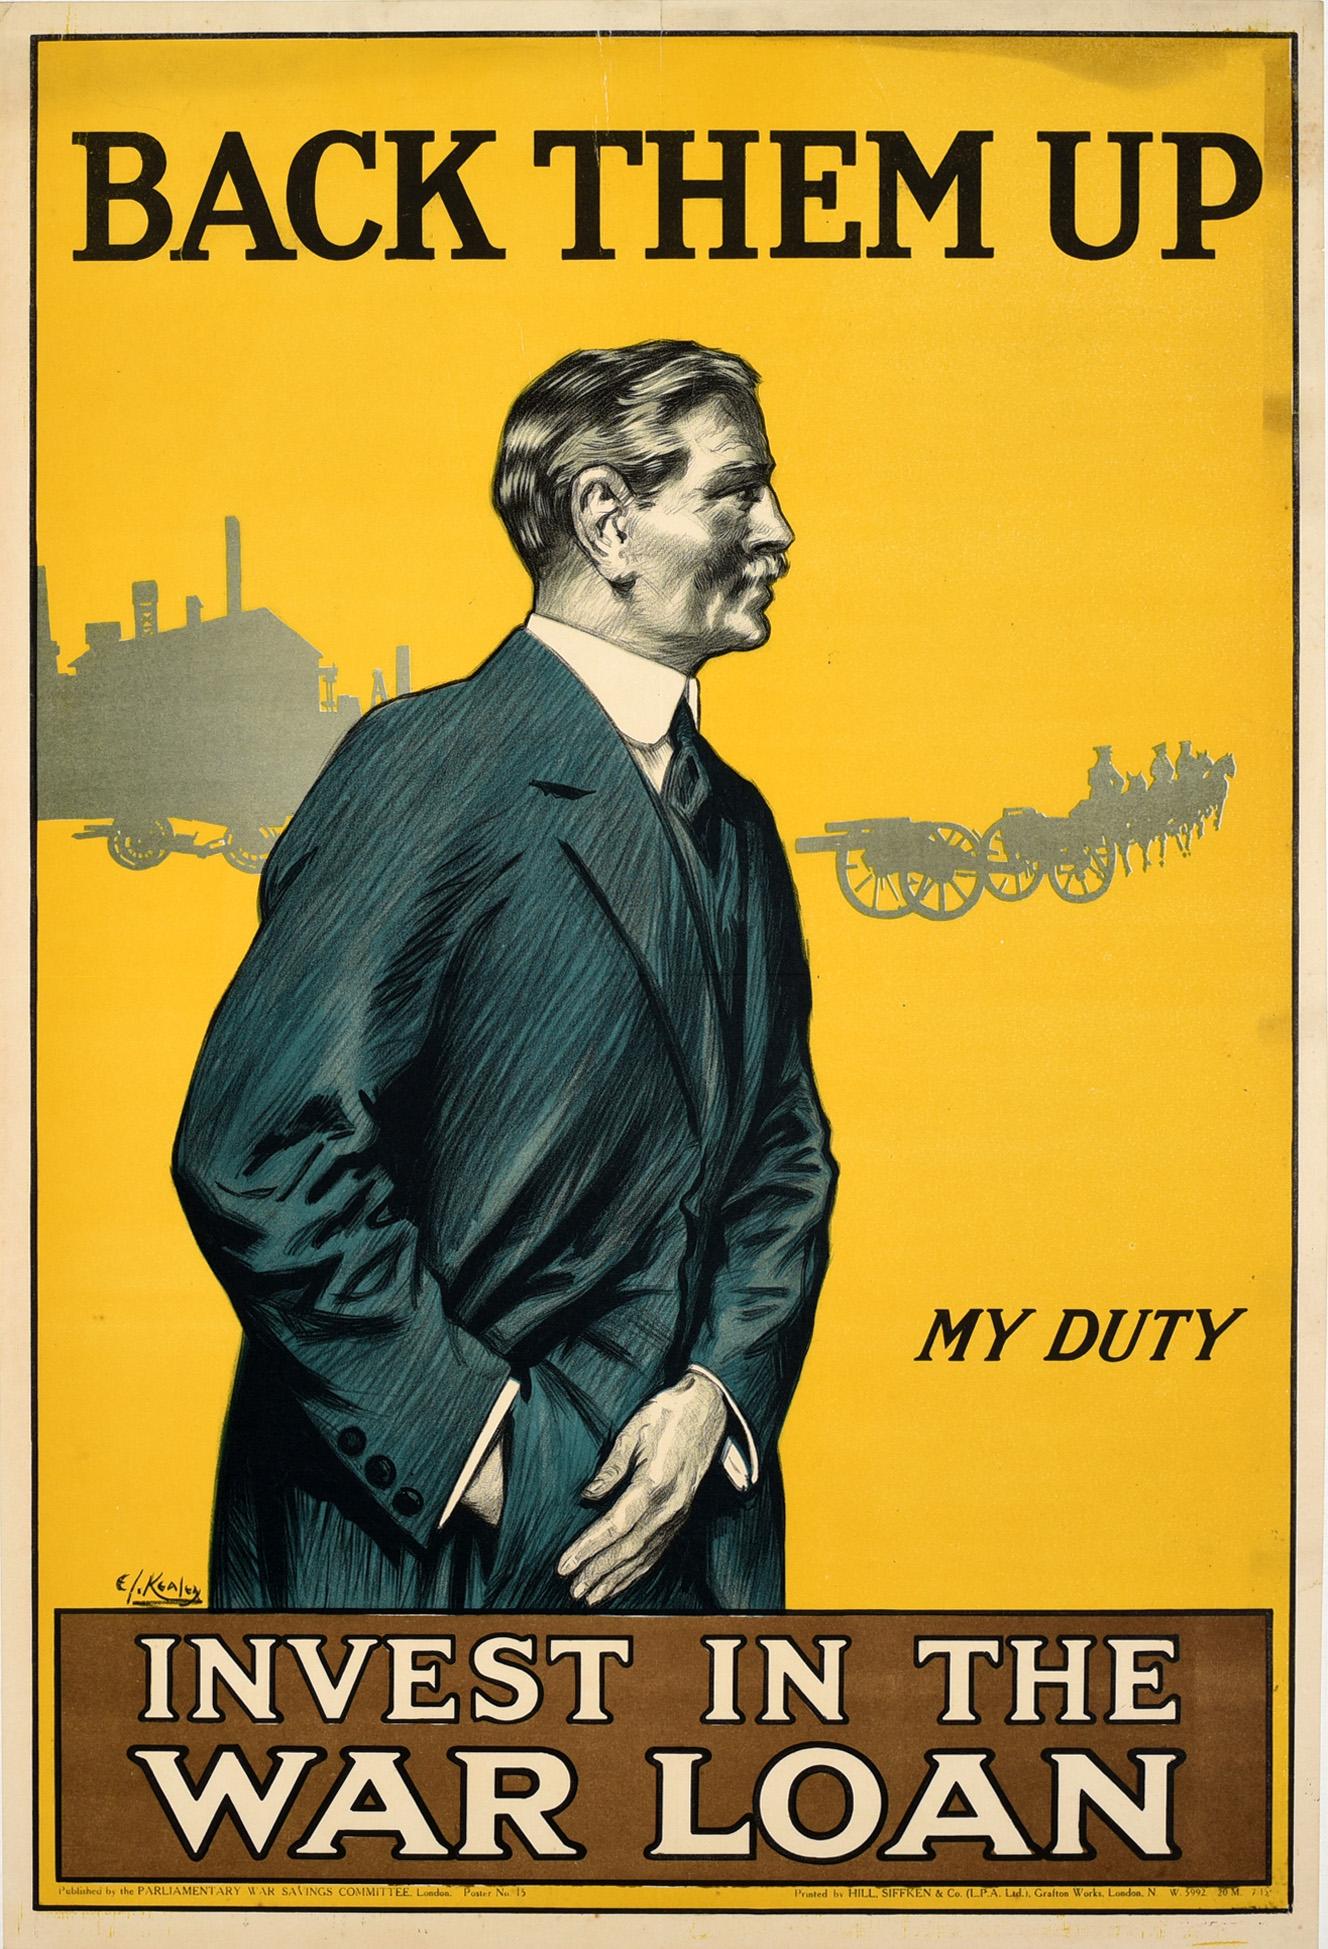 E Kealey Print - Original Antique WWI Poster Back Them Up Invest In The War Loan My Duty Finance